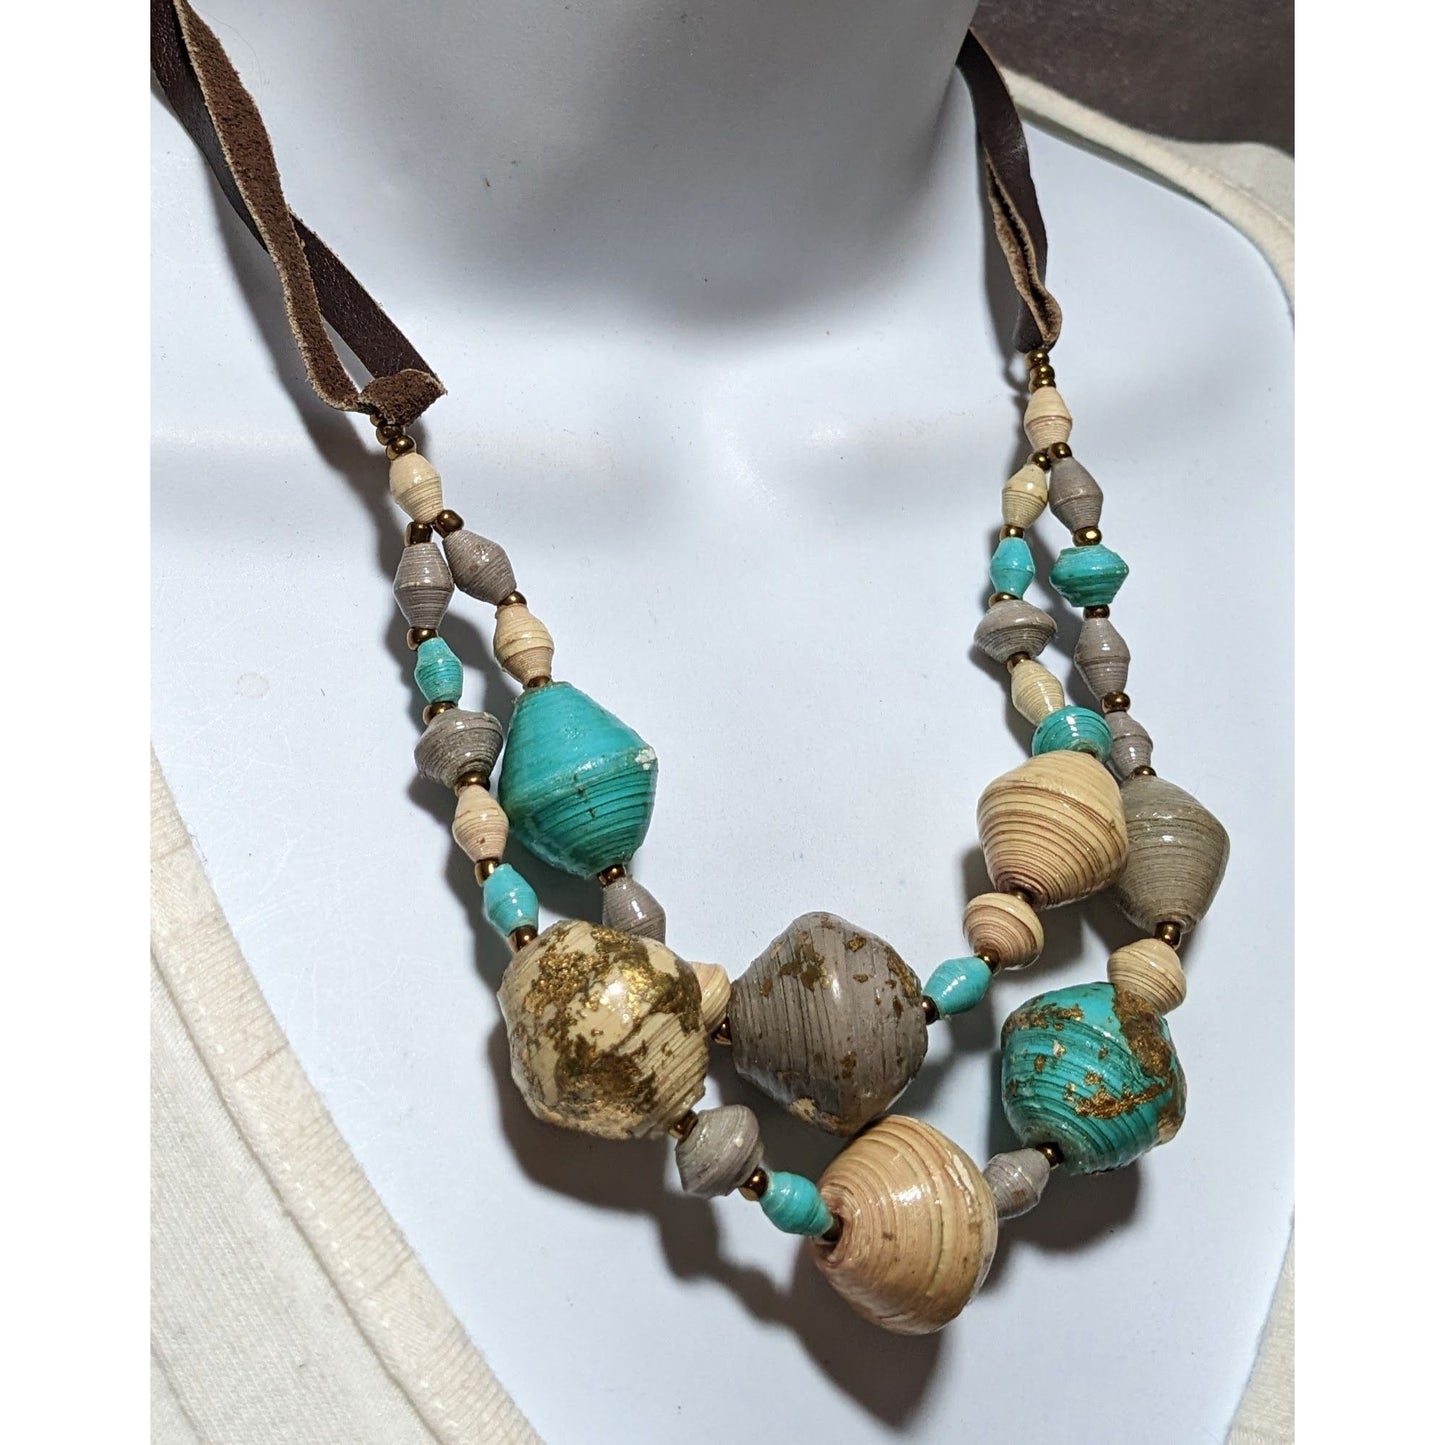 Bohemian Beaded Gold Flake Necklace